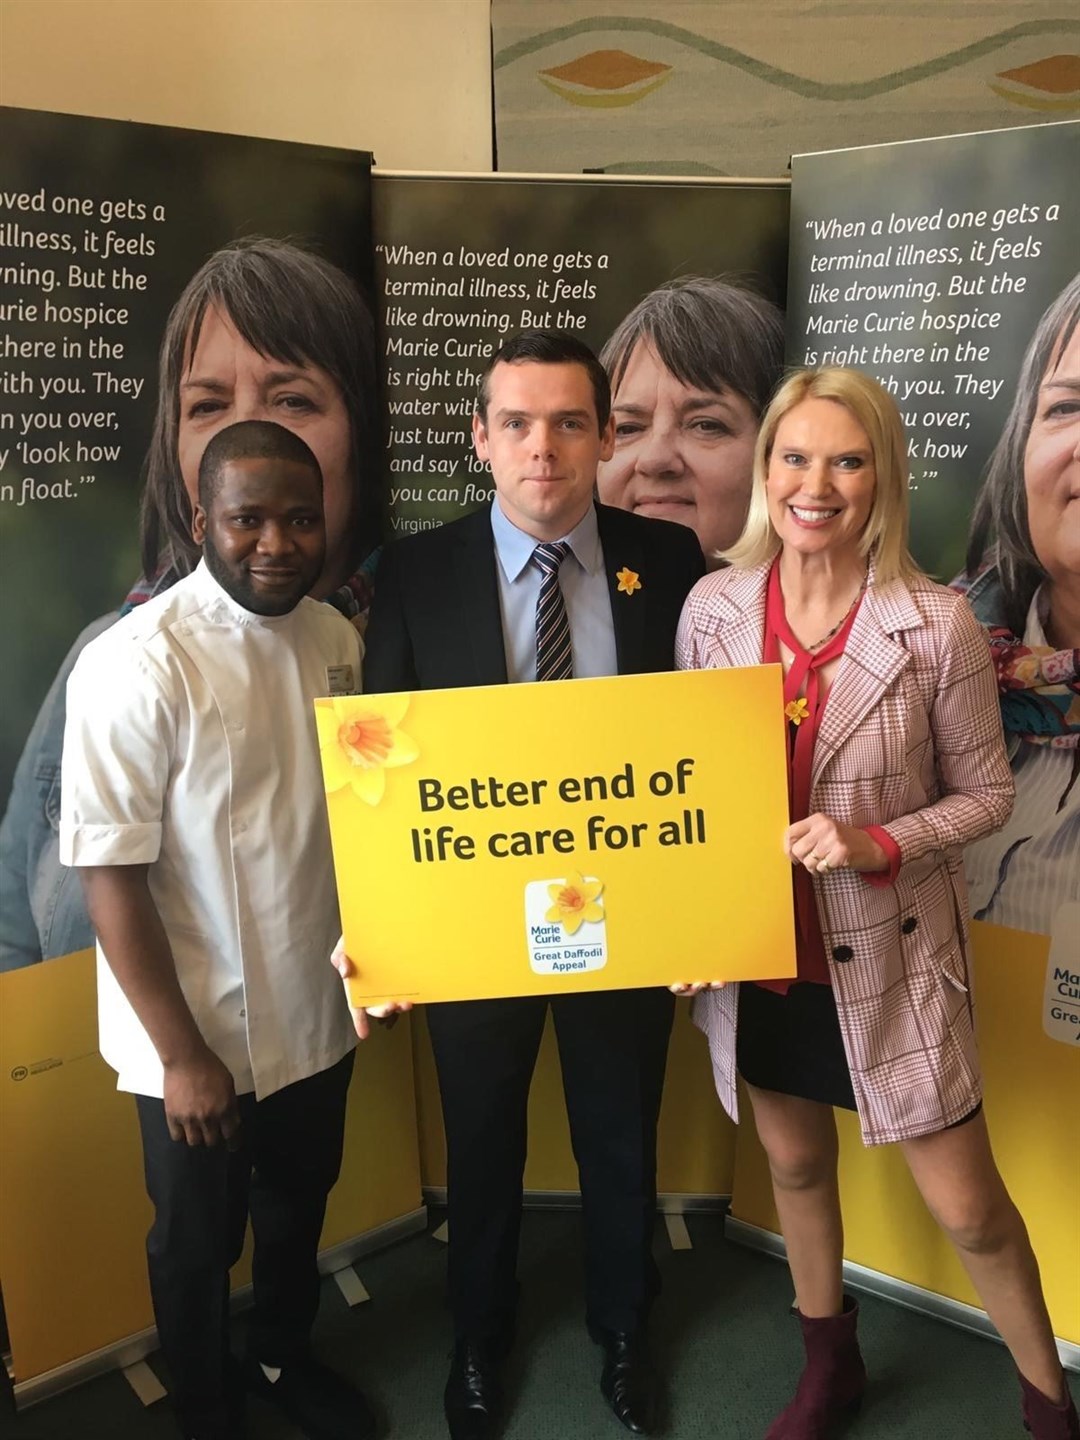 Douglas Ross MP with Lukmon Adeymi and Anneka Rice.